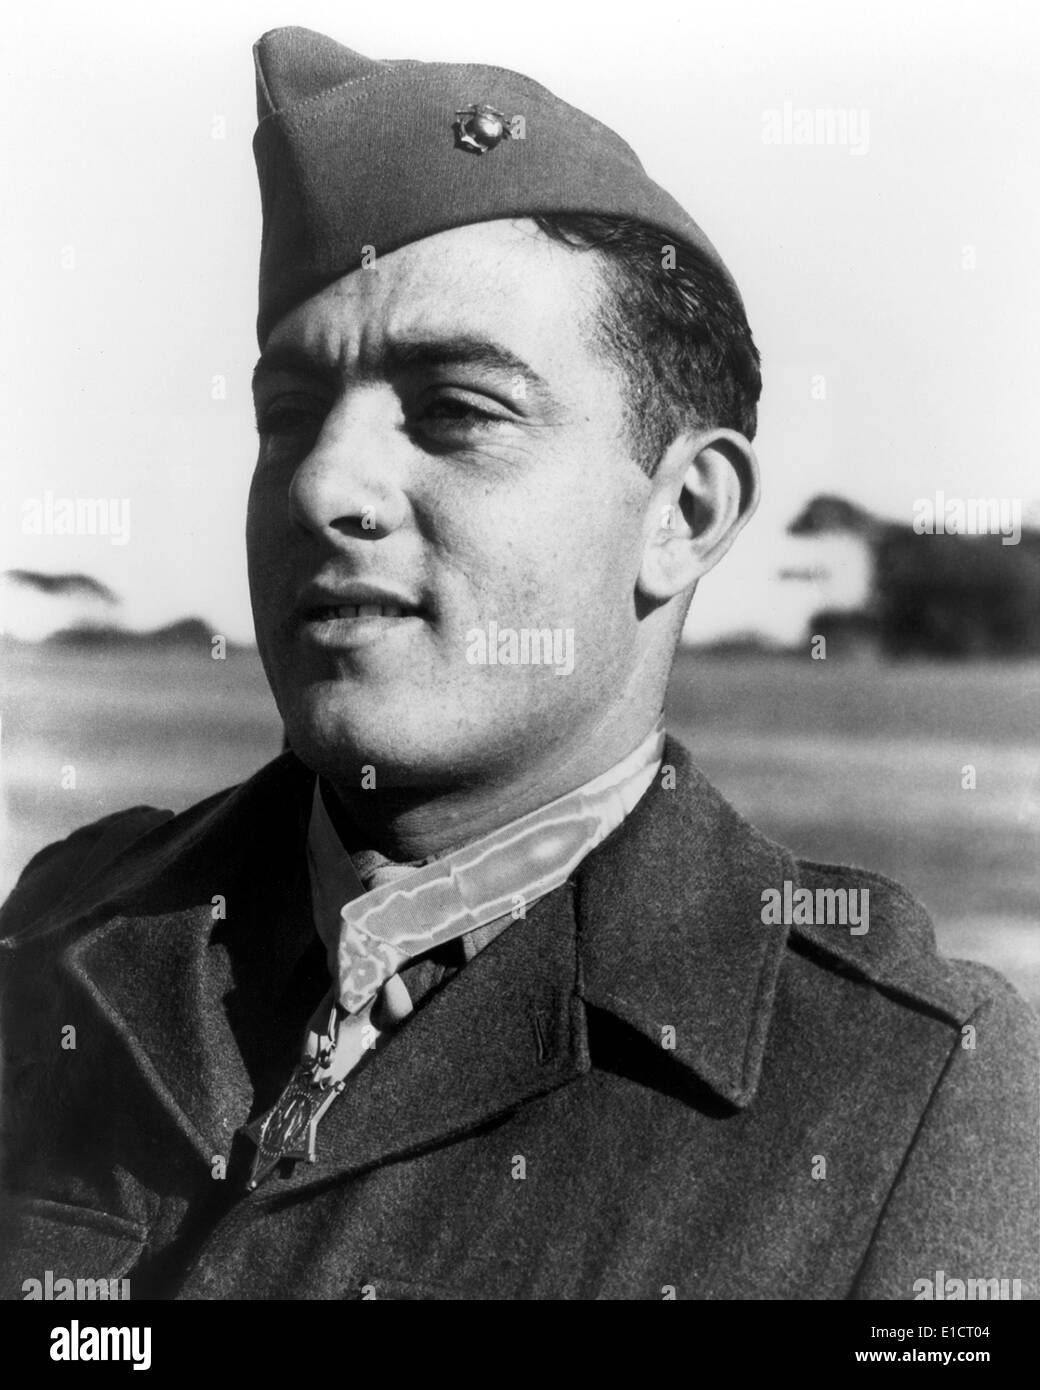 John Basilone, a Marine Gunnery Sergeant with his Medal of Honor, won in the Battle of Guadalcanal. He held off 3,000 Japanese. Portrait ca. 1943 Stock Photo